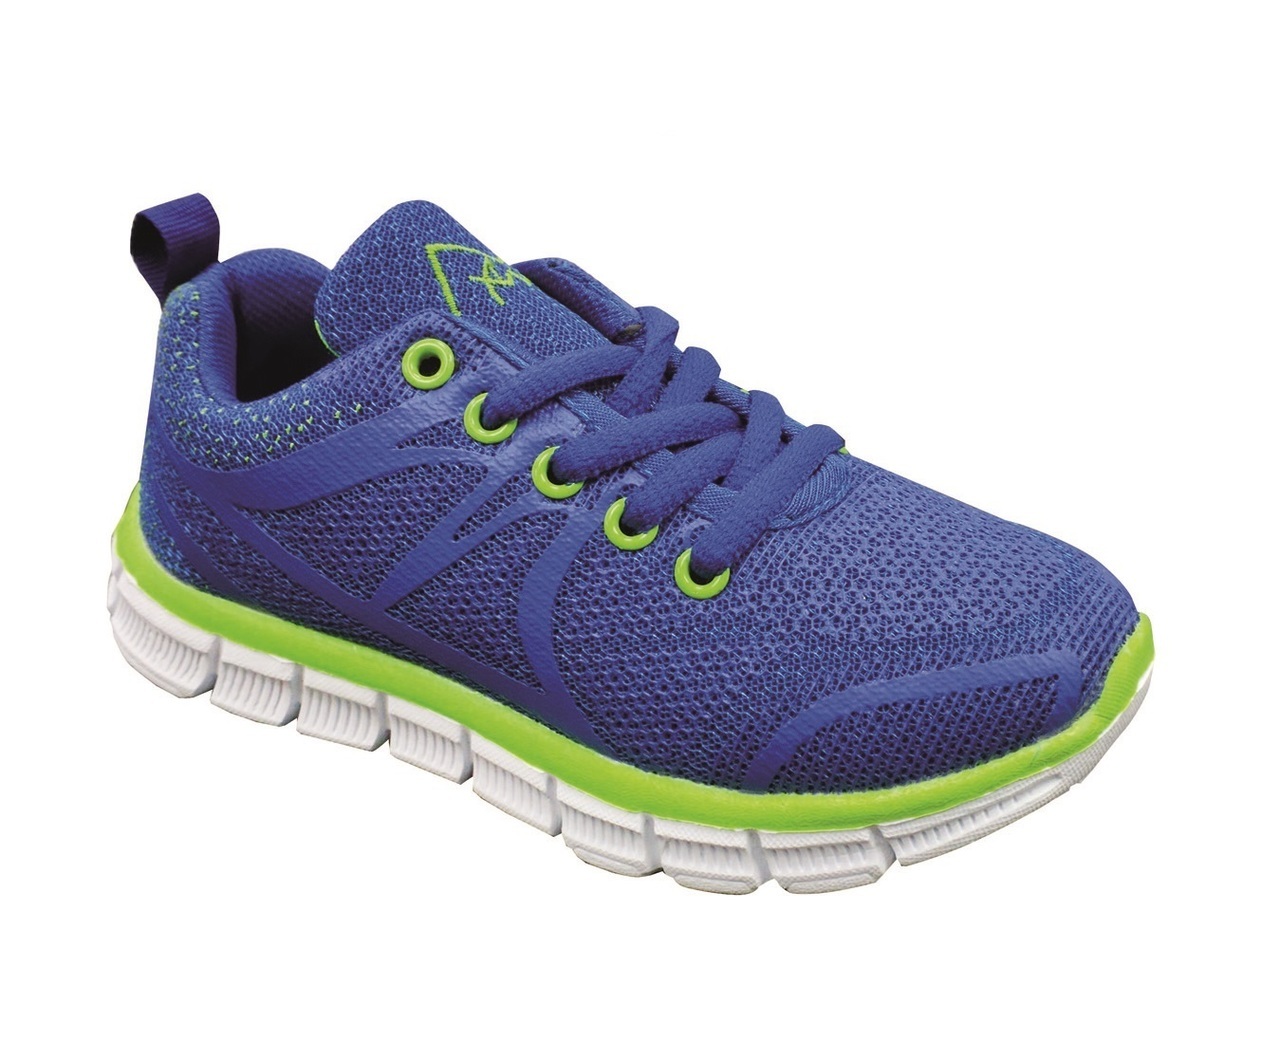 MAIR Kids Ultra Lightweight PACER Athletic Sneaker Shoe - image 1 of 4